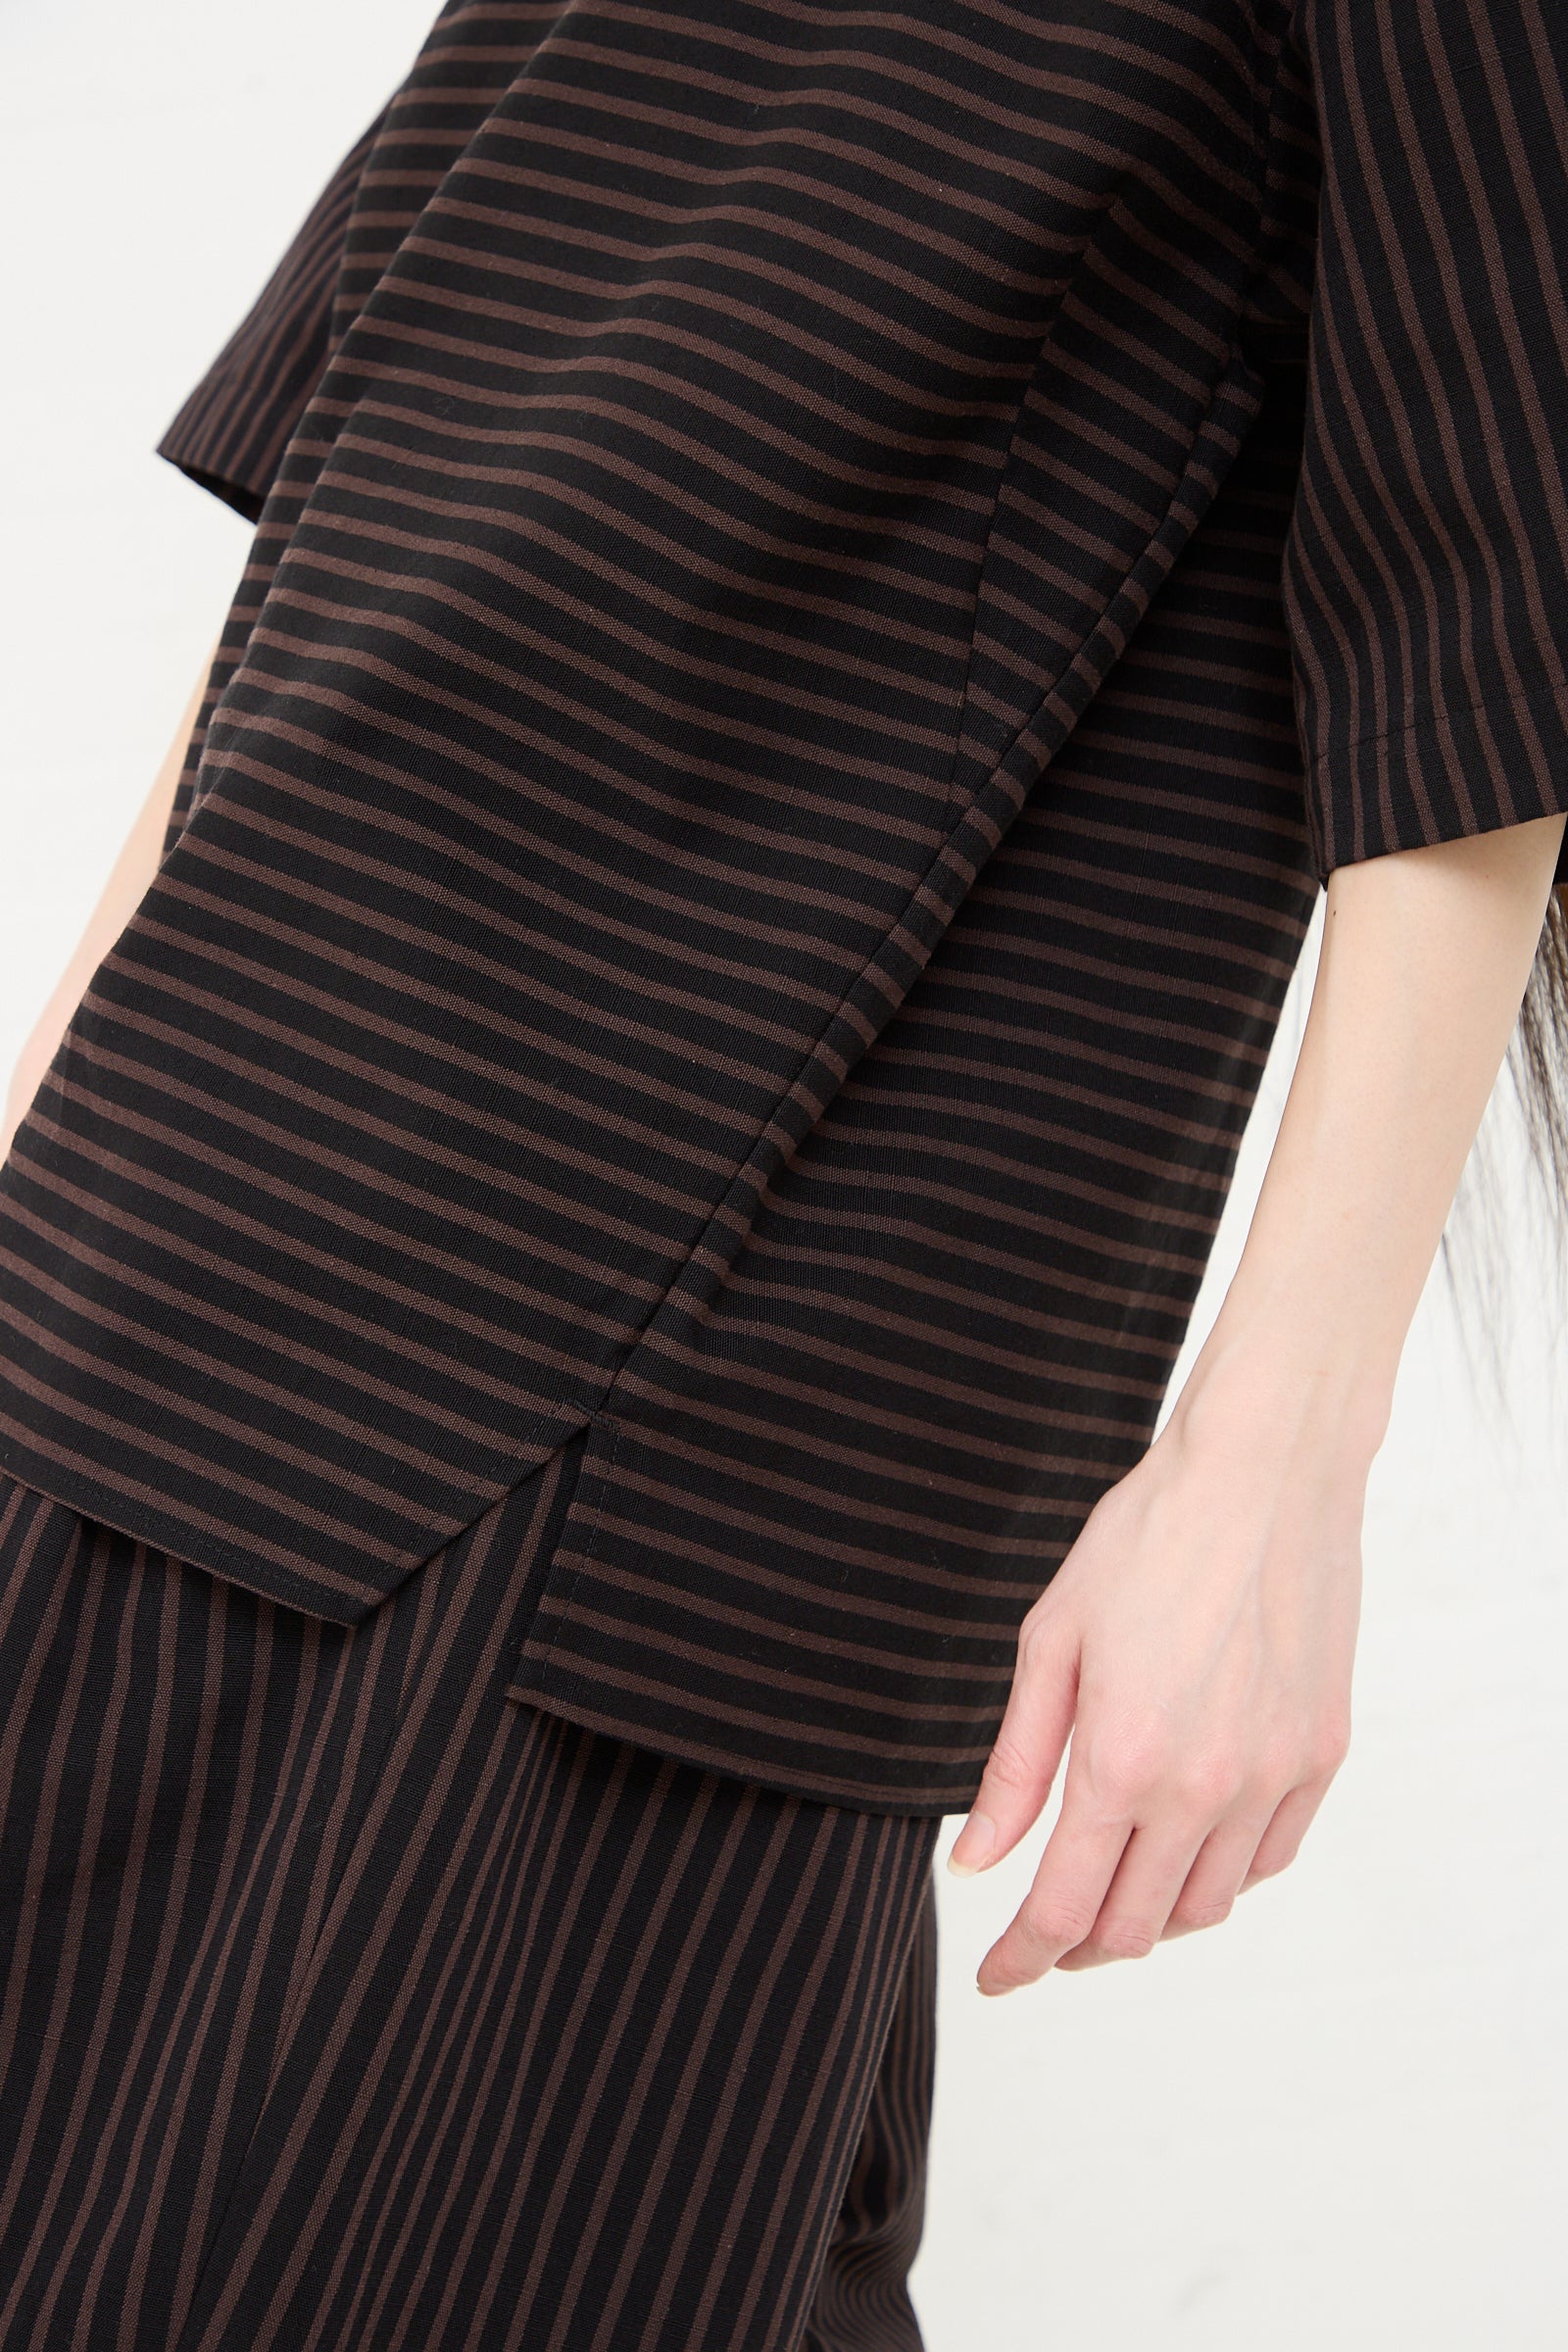 A close-up of a person wearing a Rachel Comey Ode Top in Black with a focus on the fabric's texture and boatneck collar pattern.